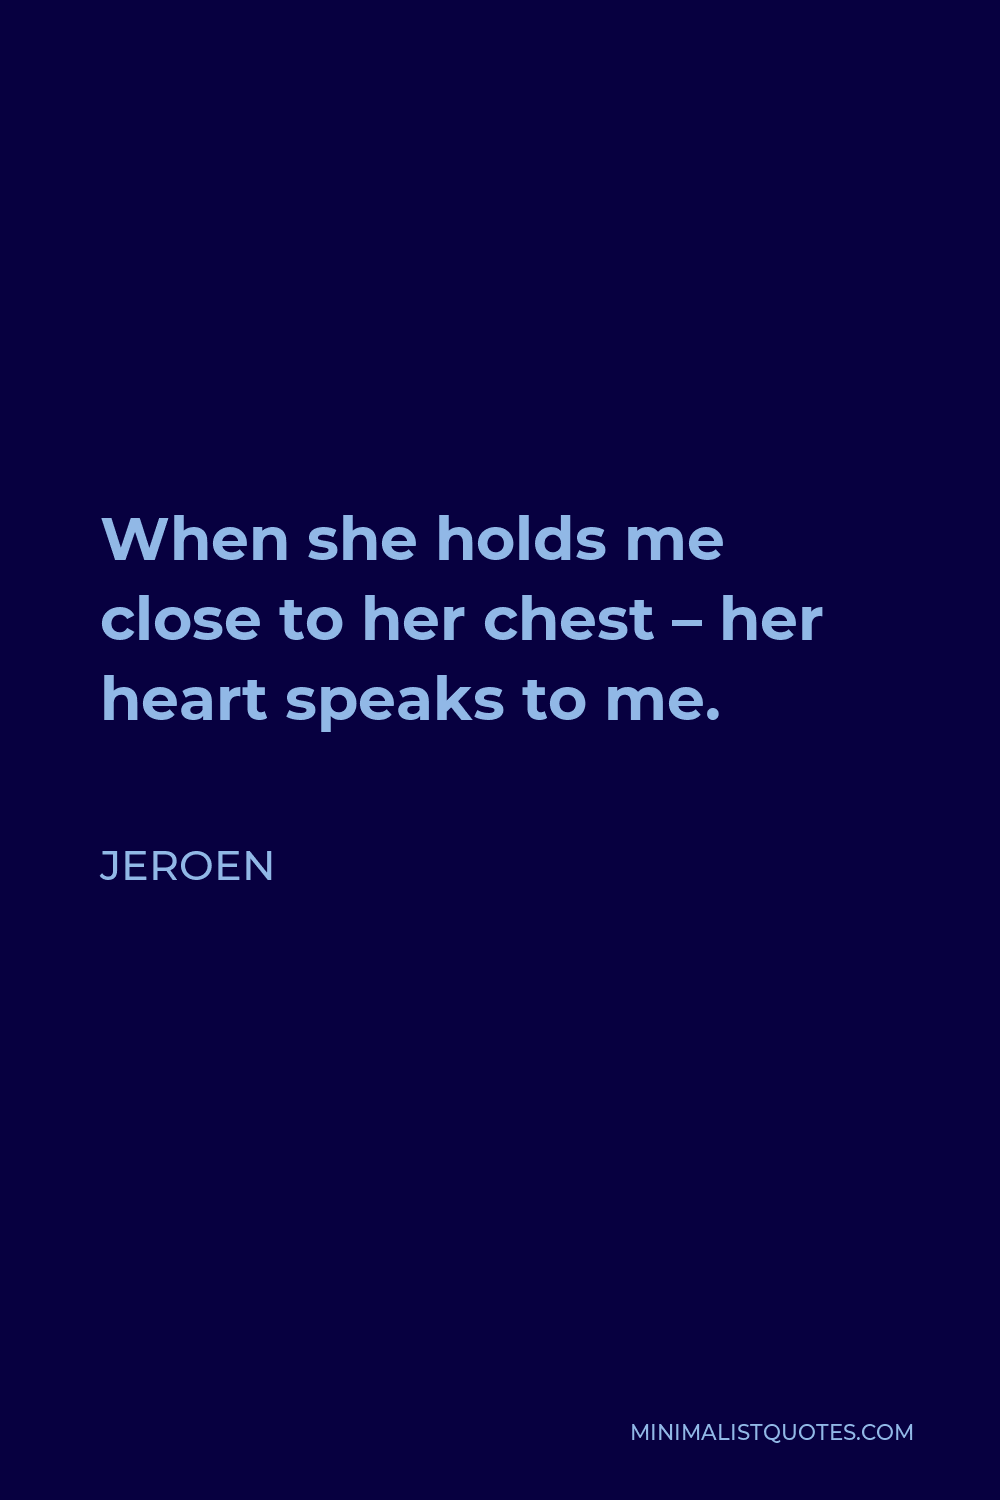 Jeroen Quote - When she holds me close to her chest – her heart speaks to me.